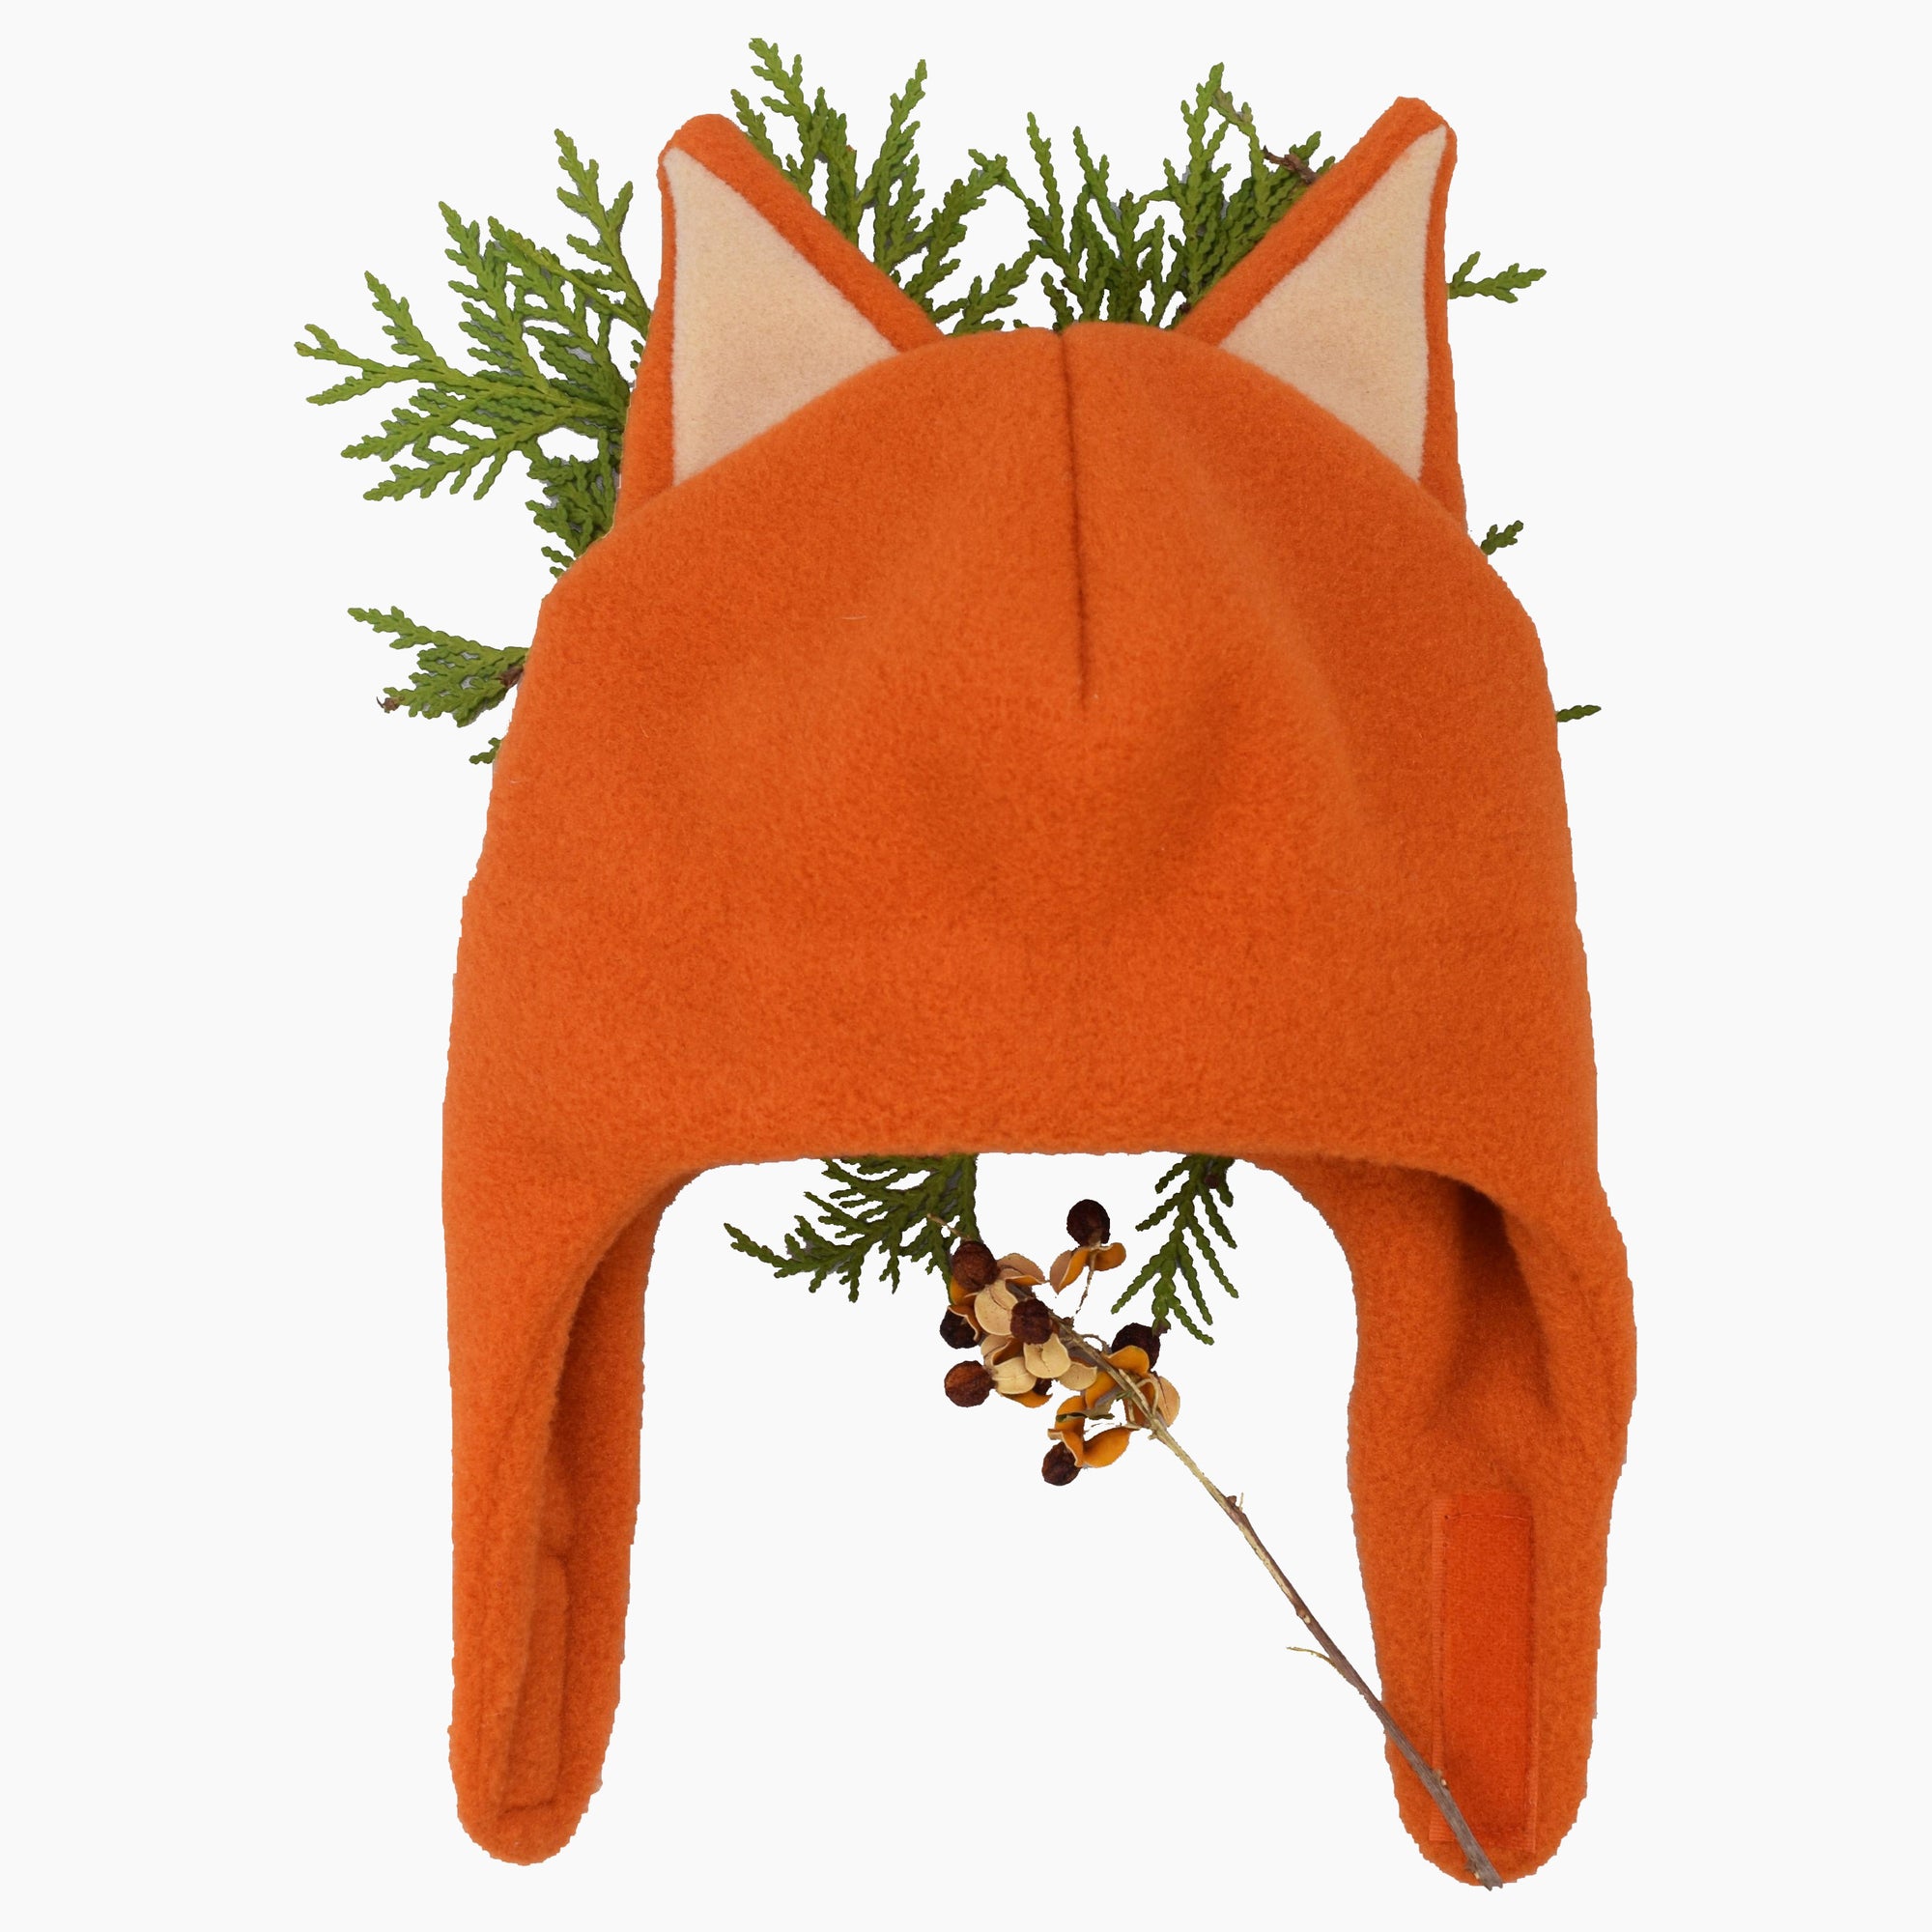 Adorable Fox Hat by Puffin Gear for Kids-Polartec Fleece-Made in Canada